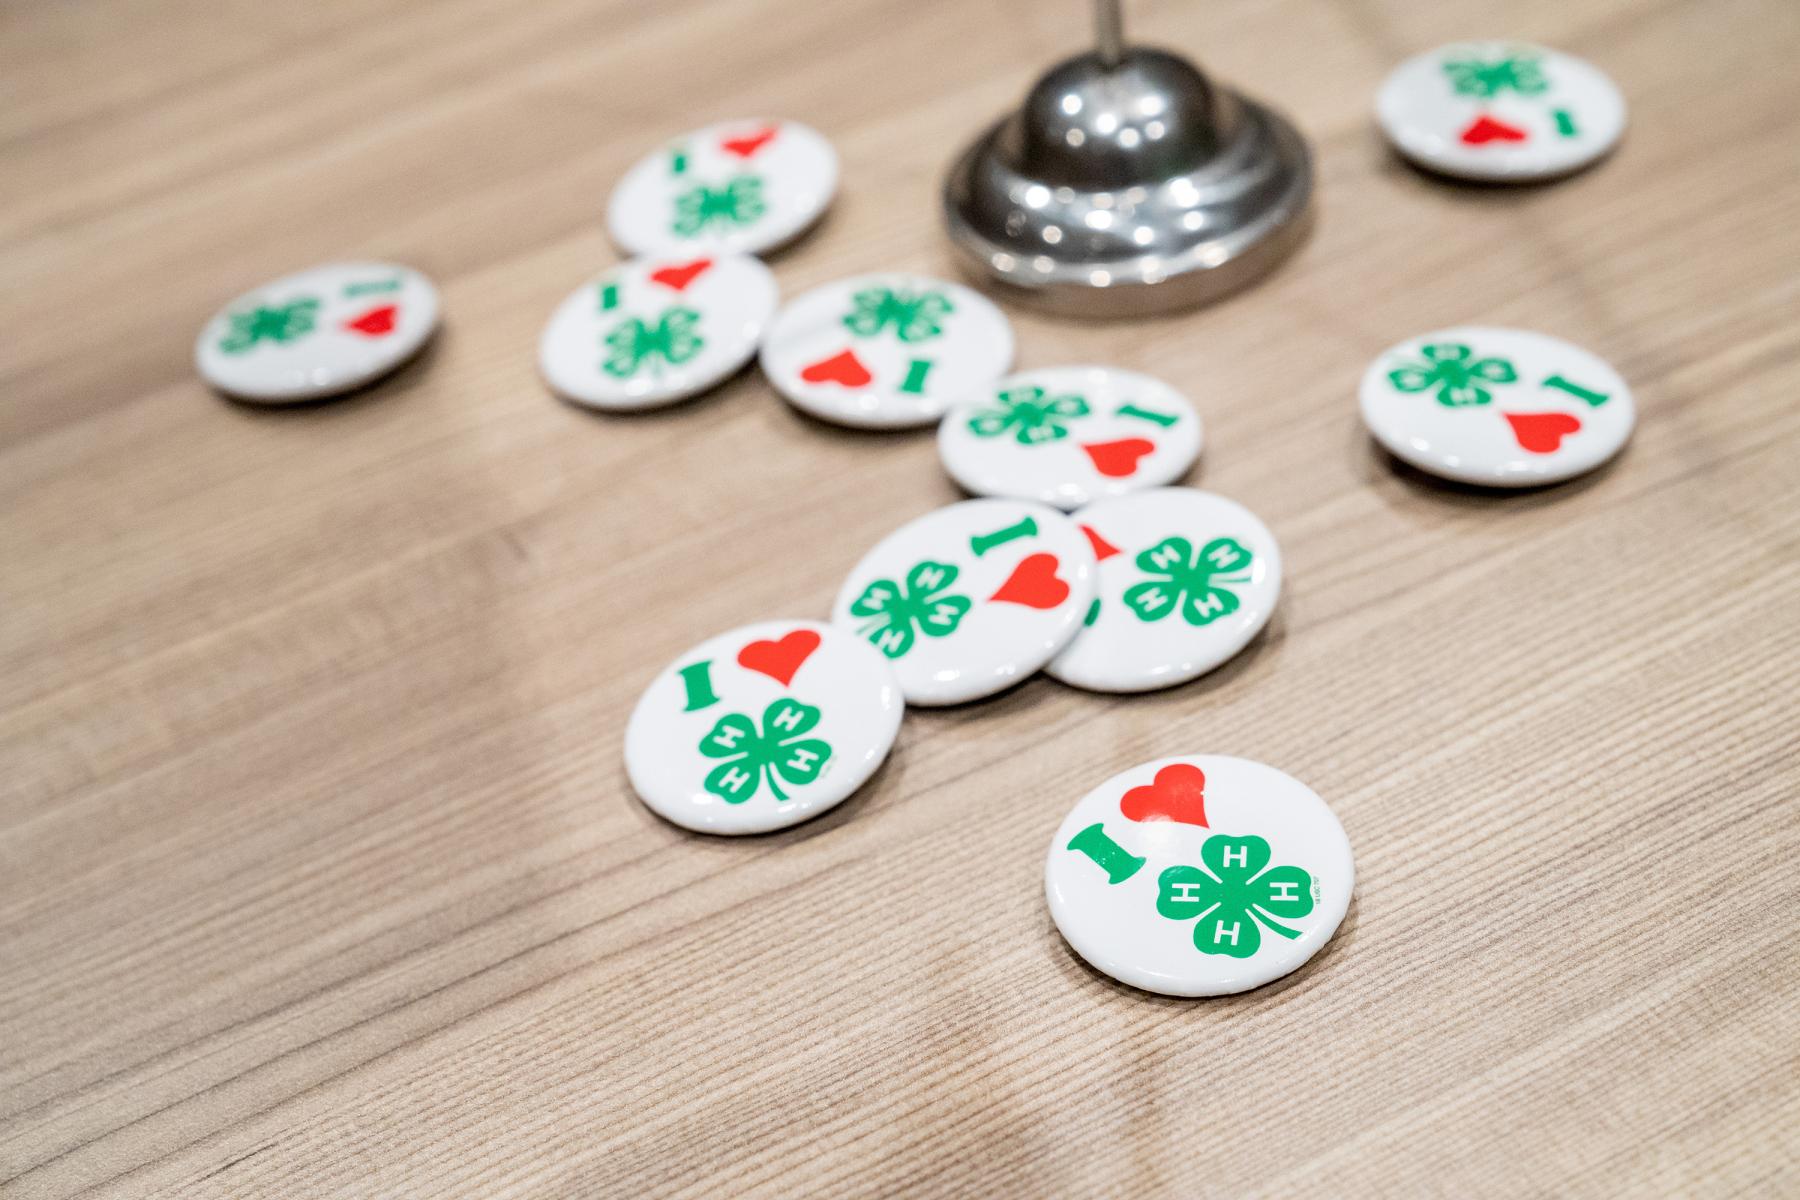 I heart 4-H buttons scattered on a tabletop